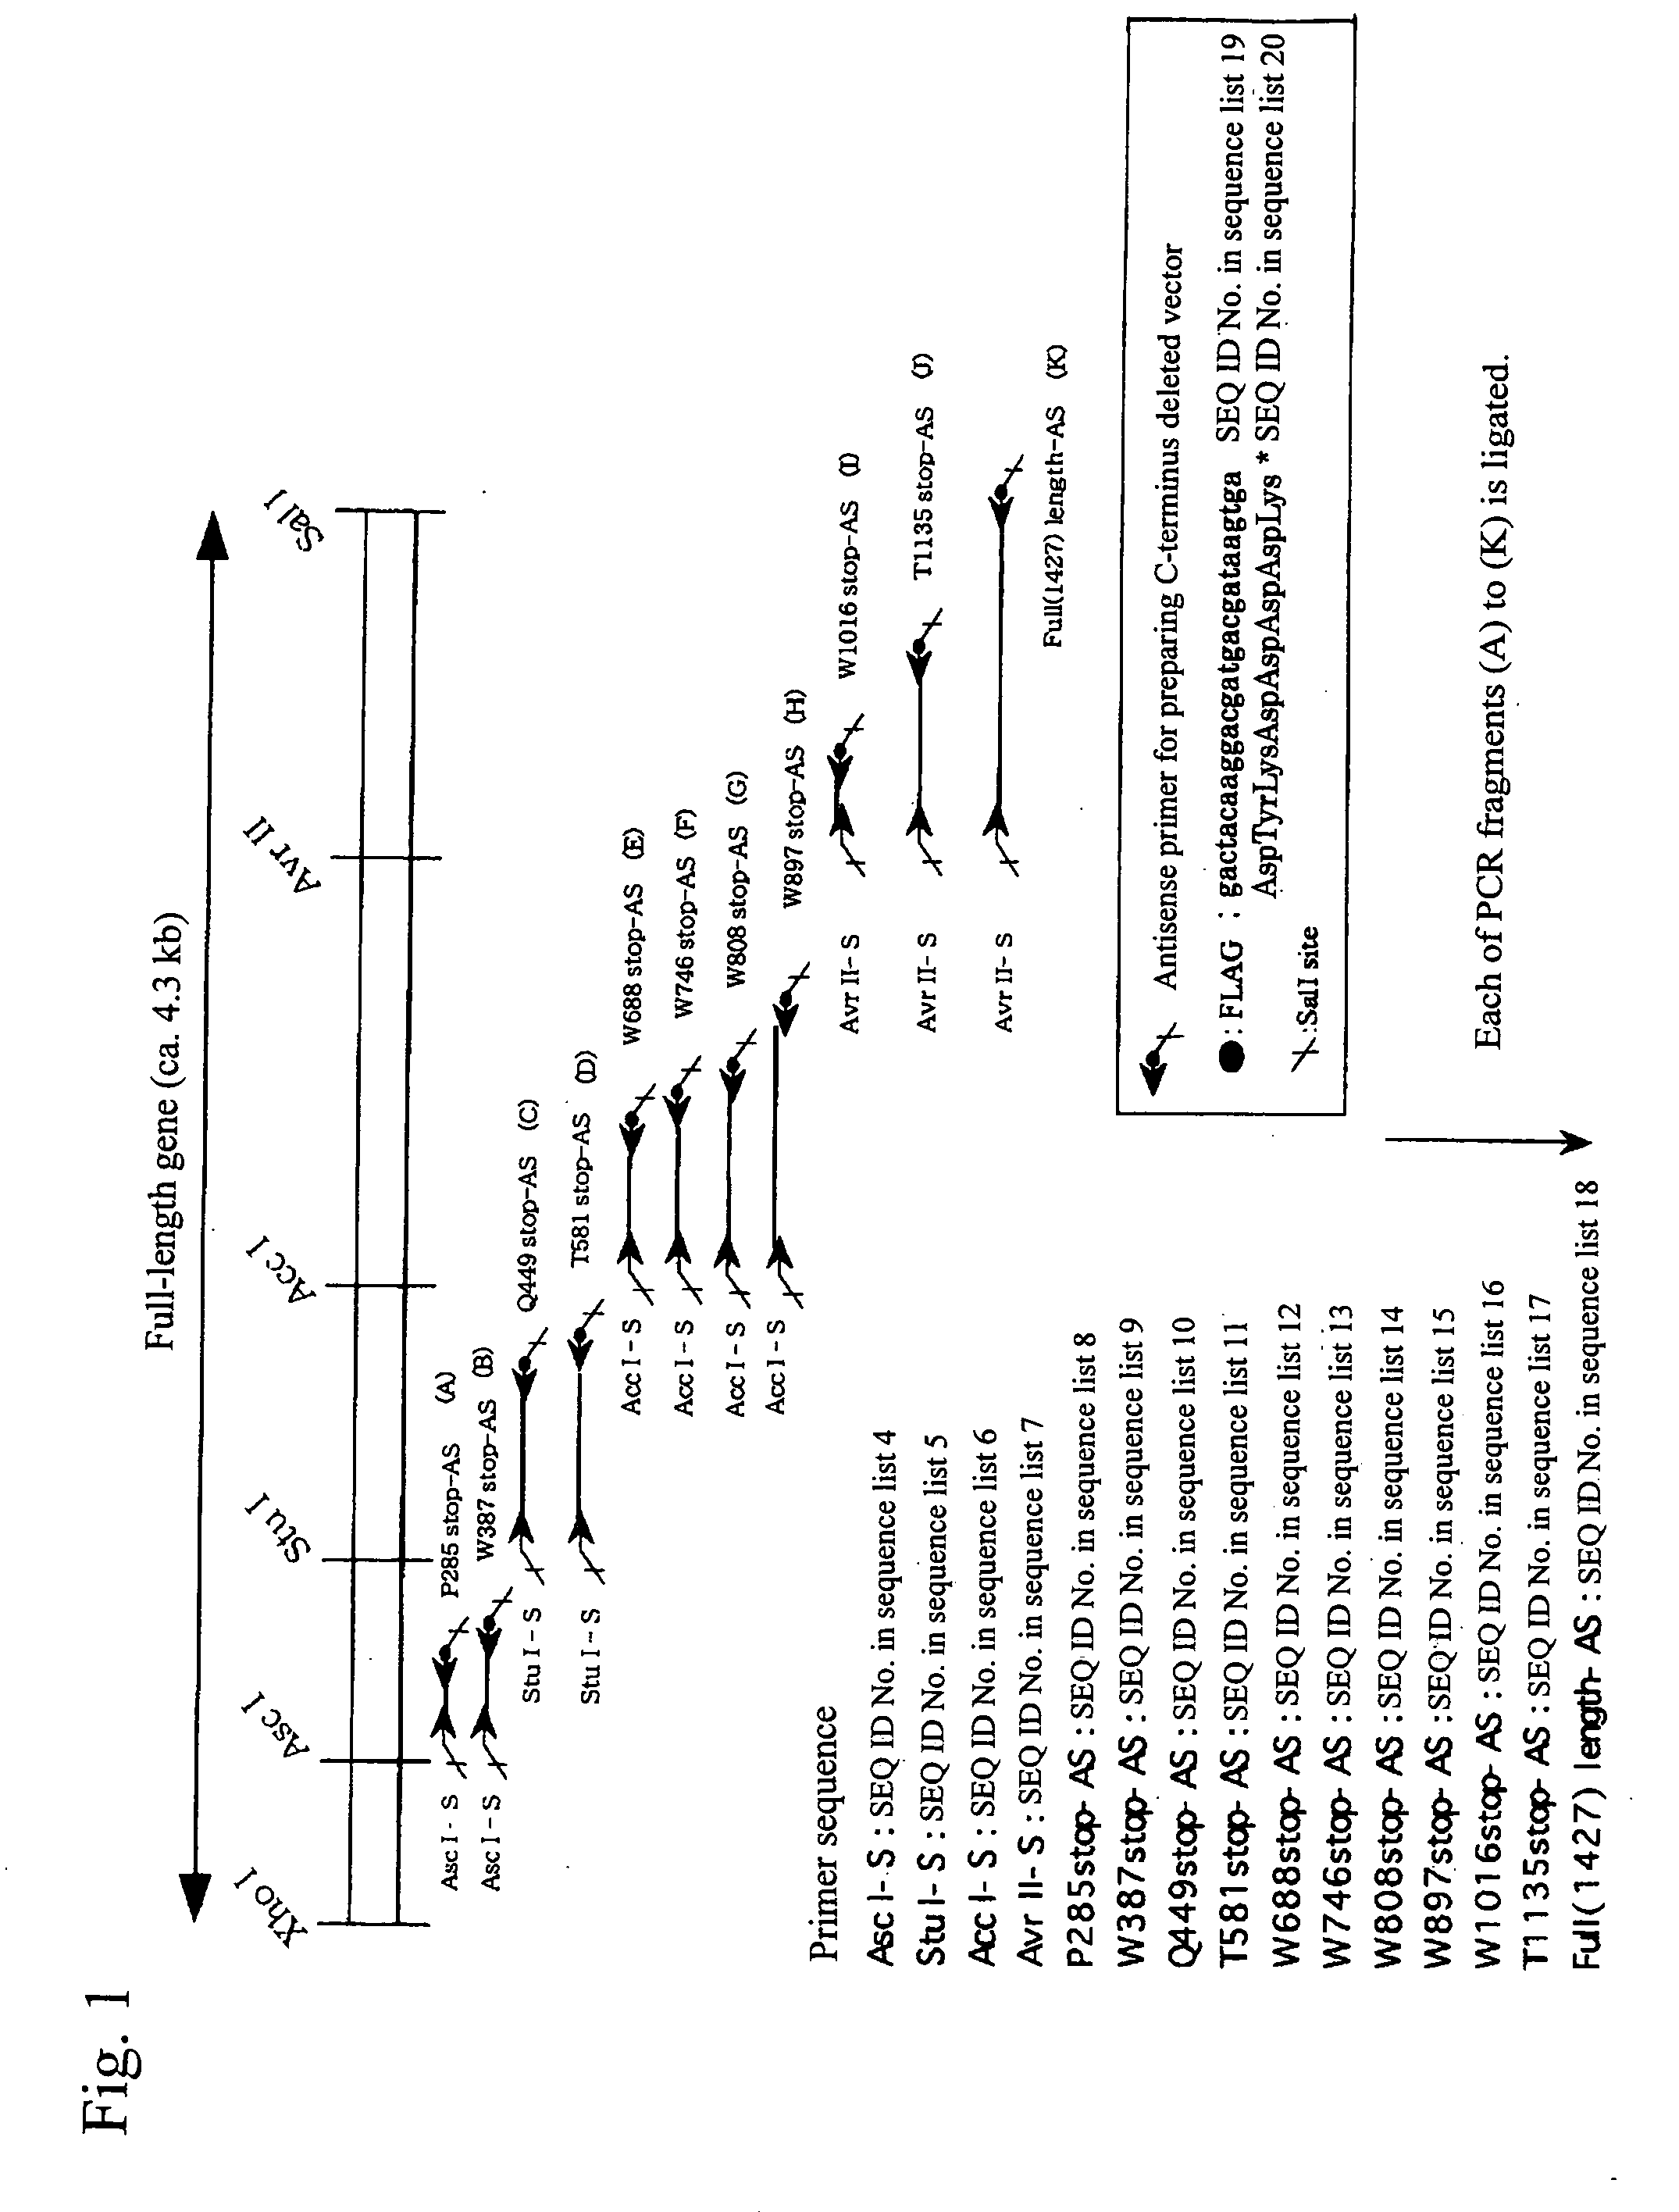 Antibody against enzyme specifically cleaving von villebrand factor and assay system using the same